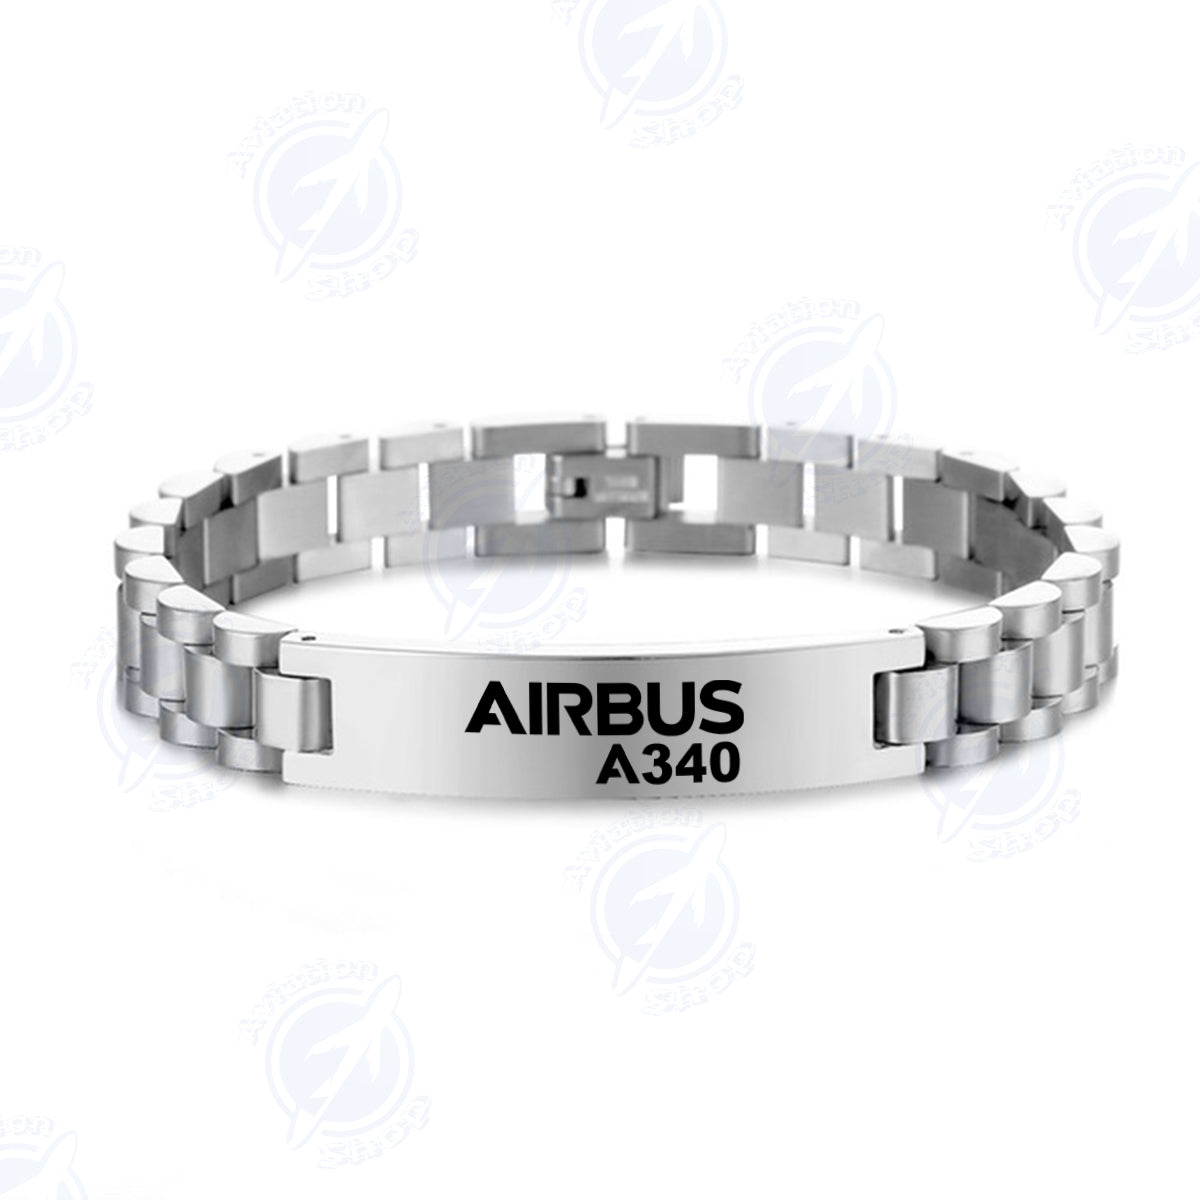 Airbus A340 & Text Designed Stainless Steel Chain Bracelets